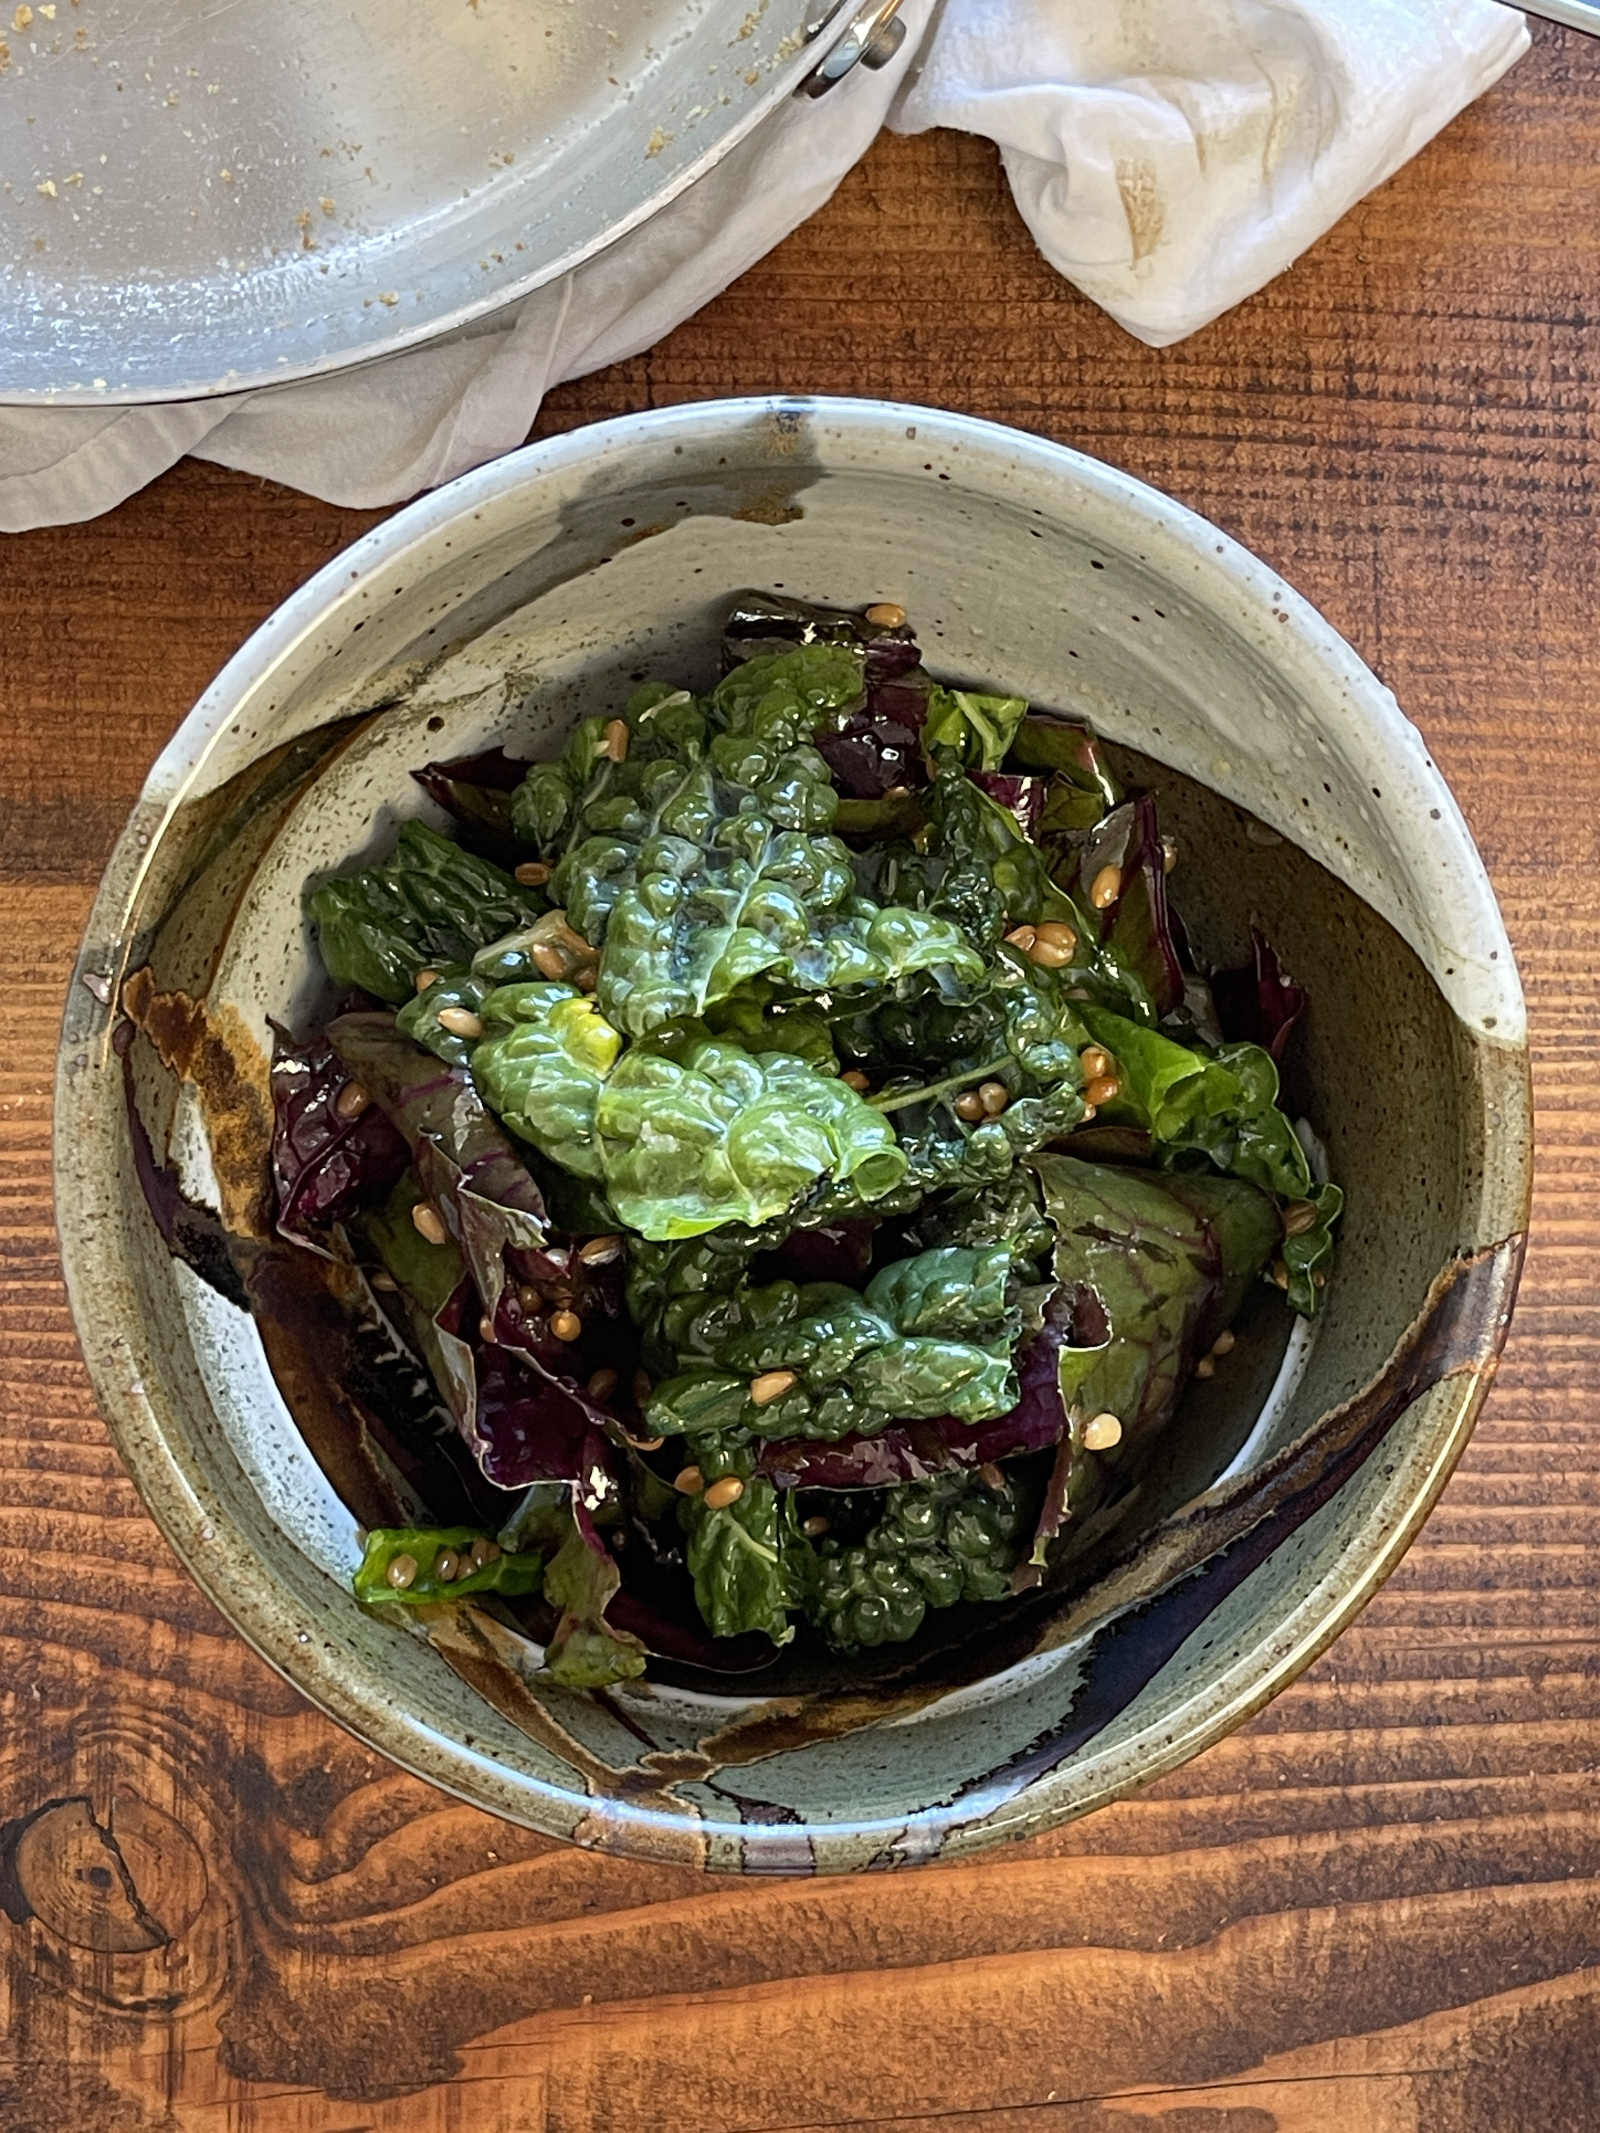 A ceramic bowl of kale, wheat berry and preserved lemon salad sits on a dark wooden table.